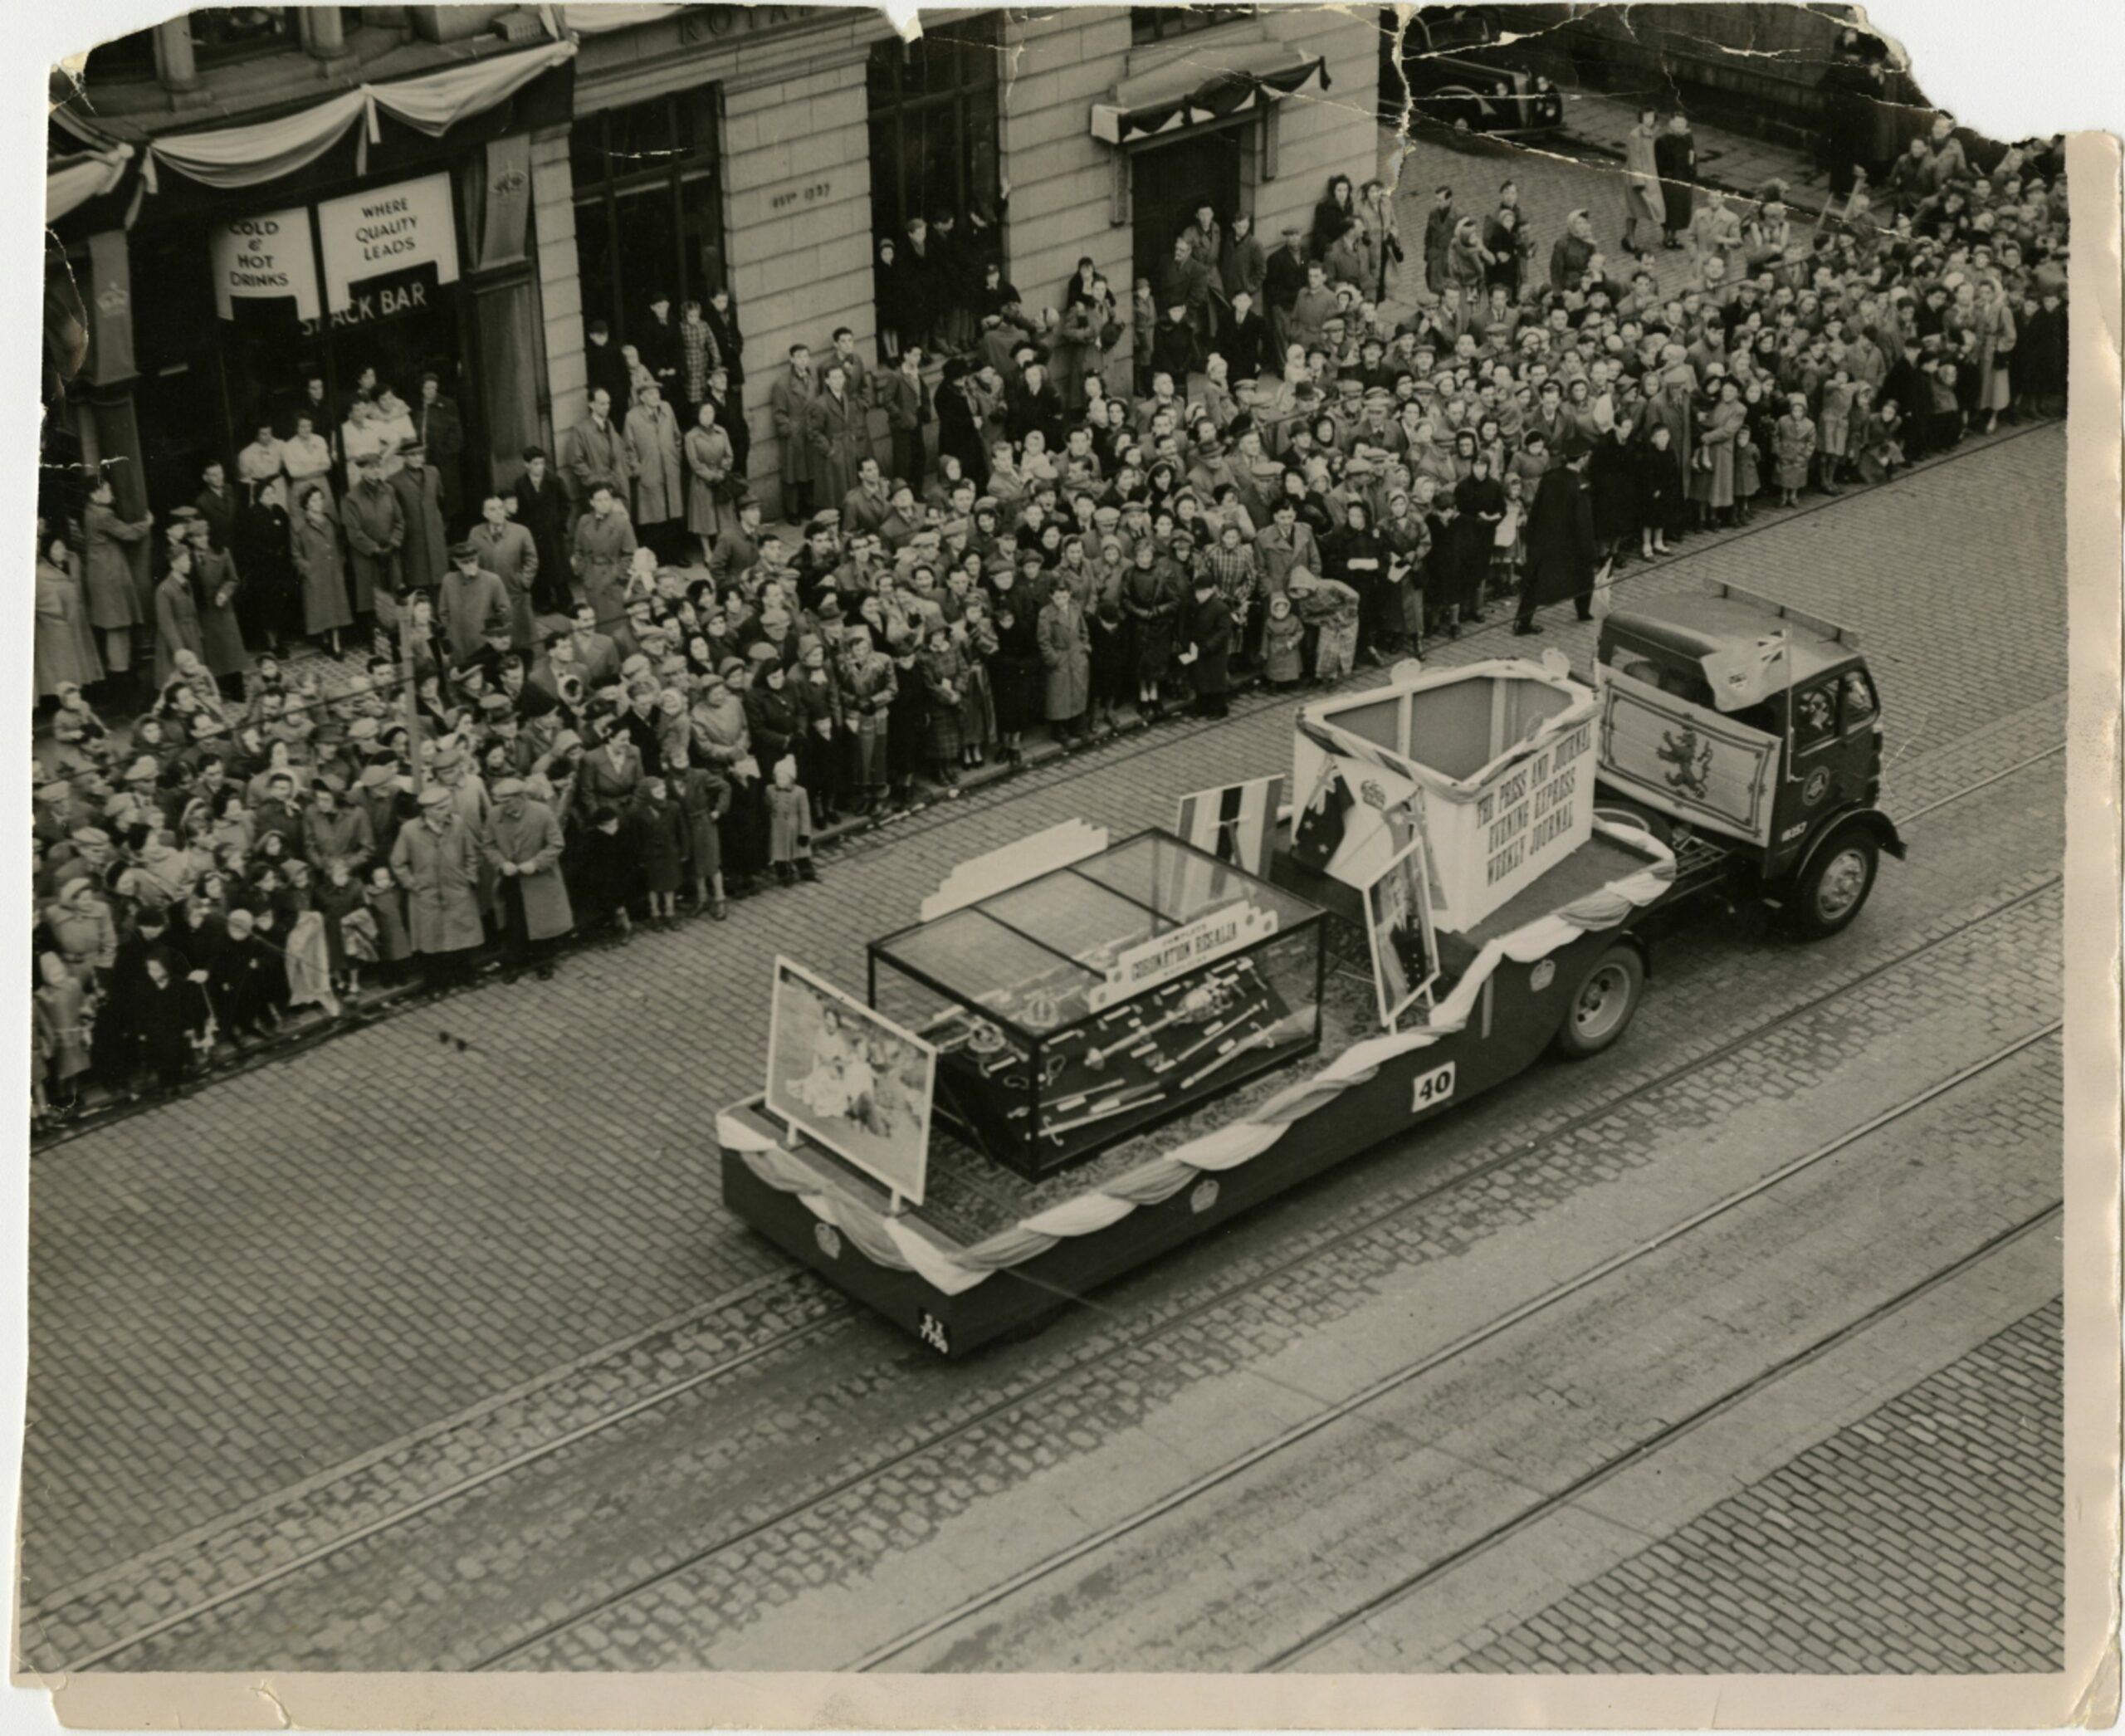 The Press and Journal float in Aberdeen's parade and procession.